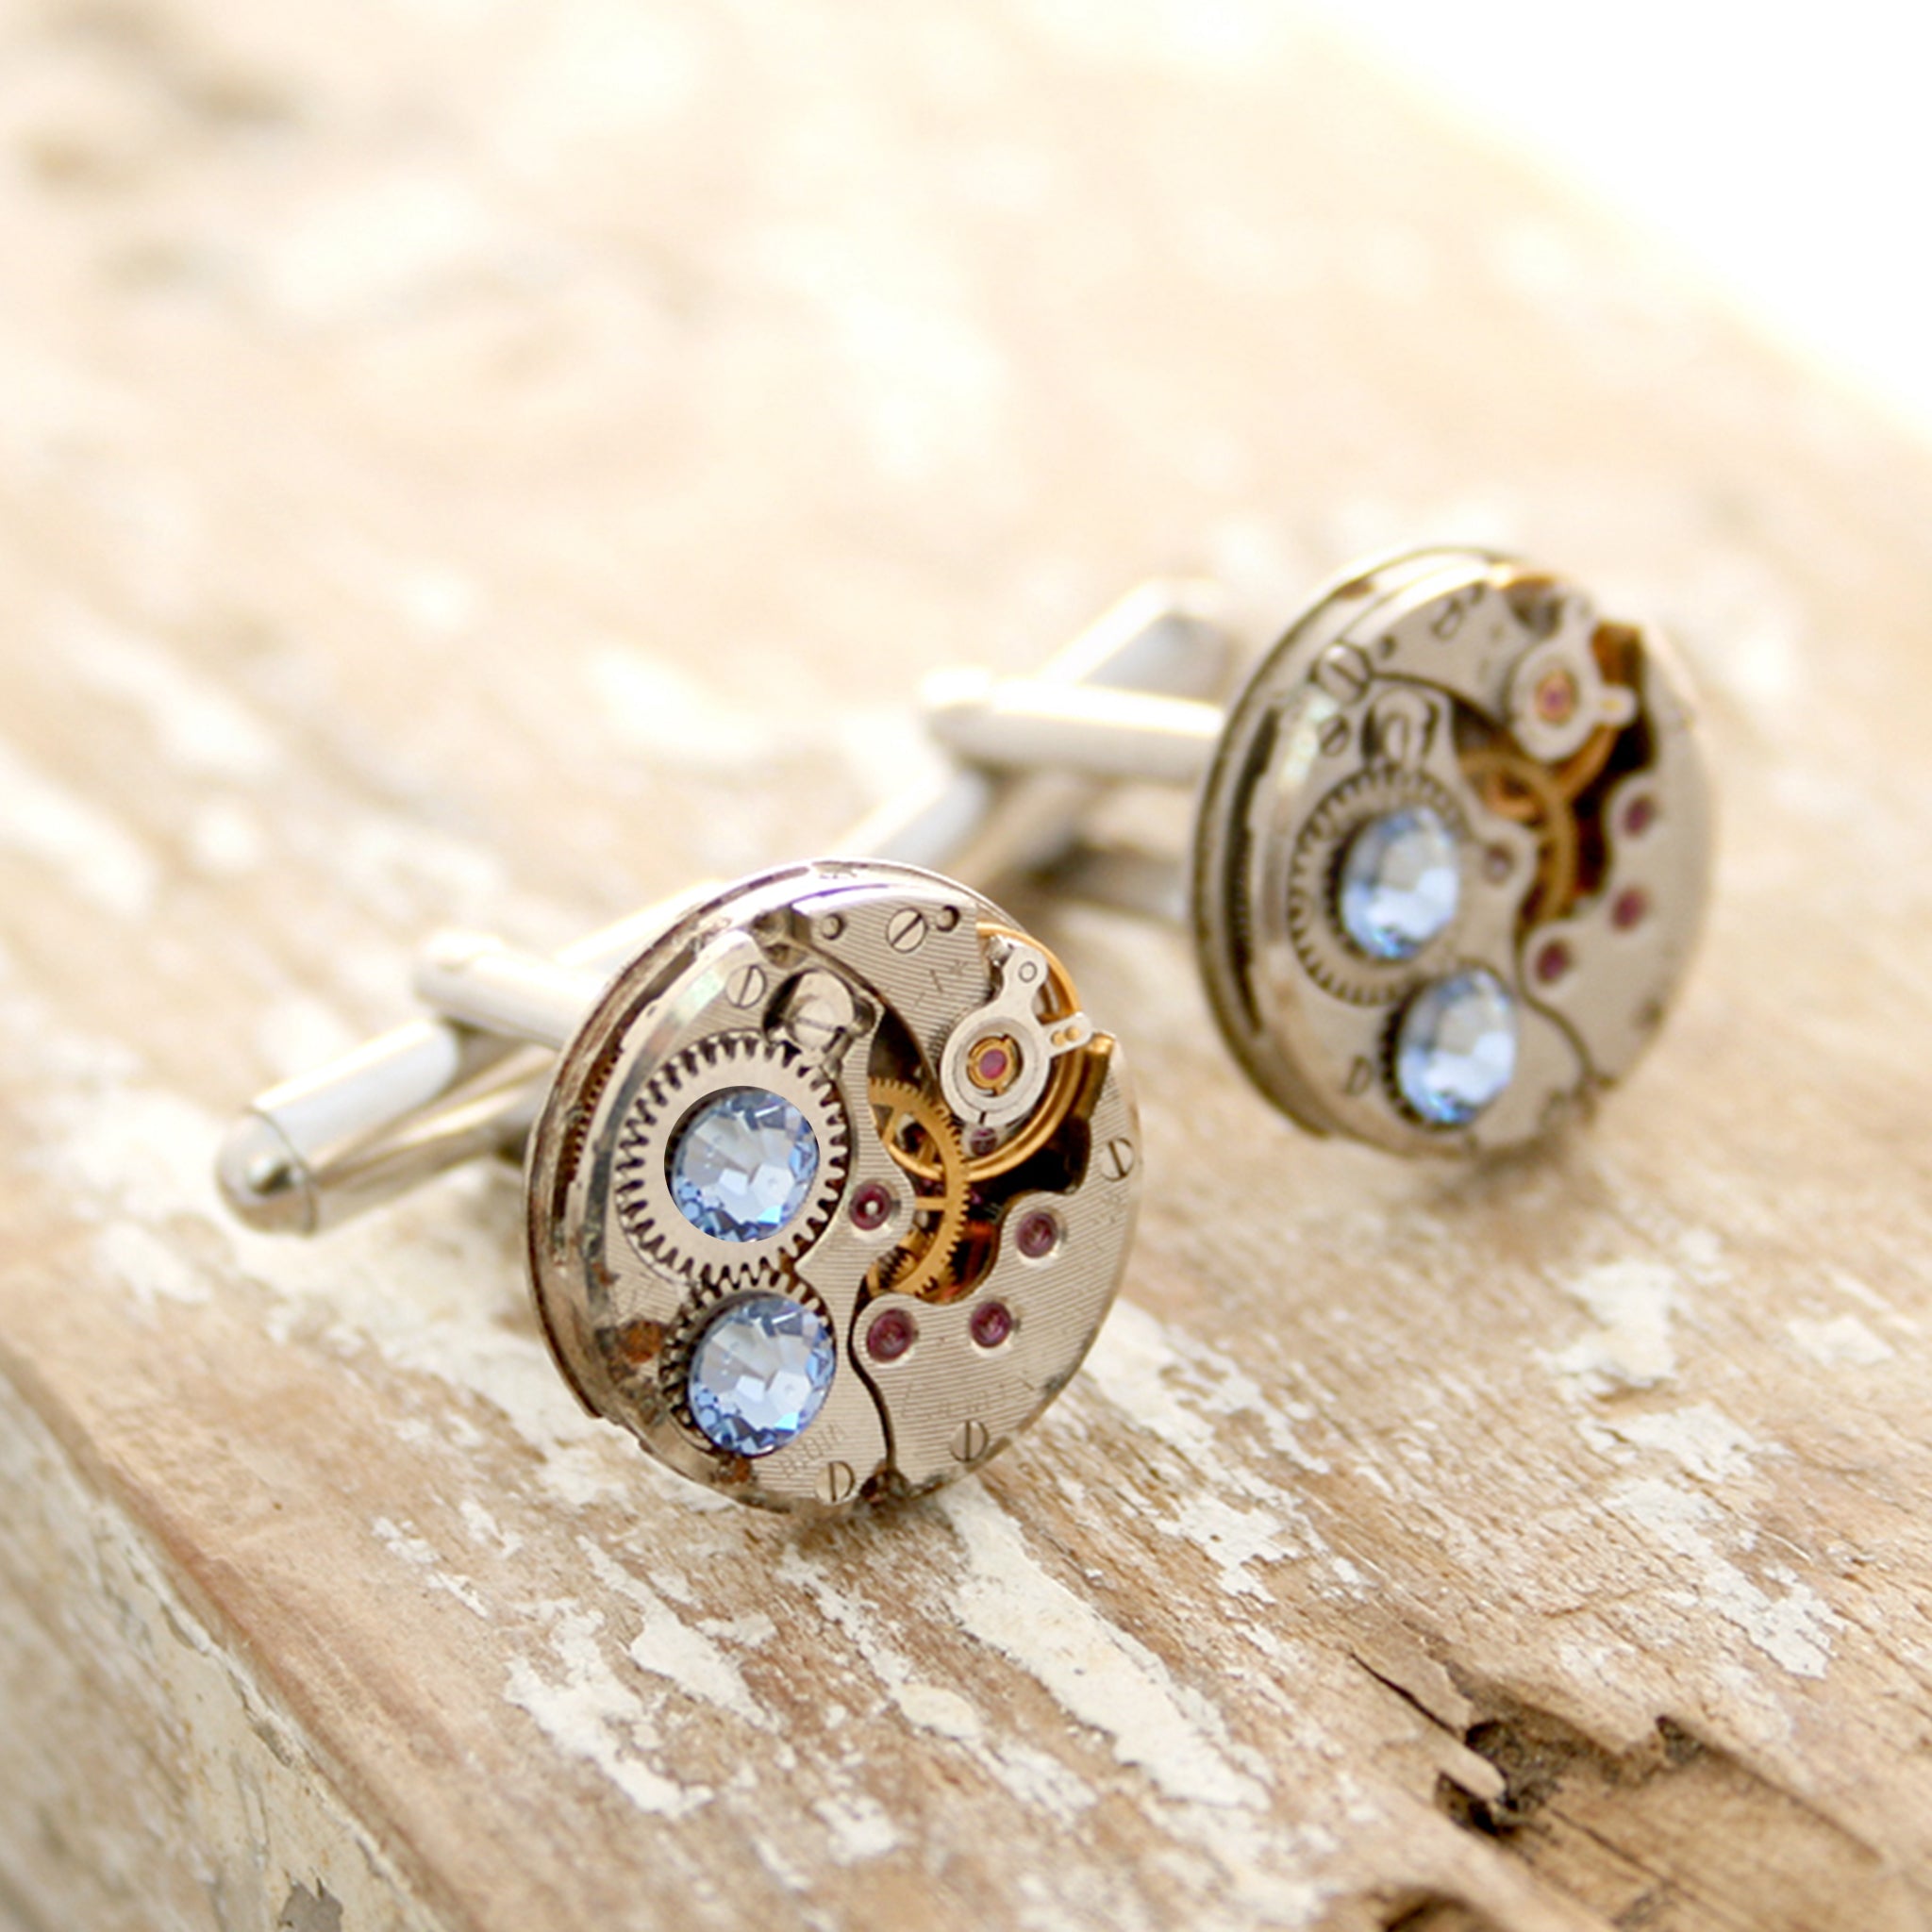  birthstone cufflinks in steampunk style featuring antique watch movements and Sapphire crystals